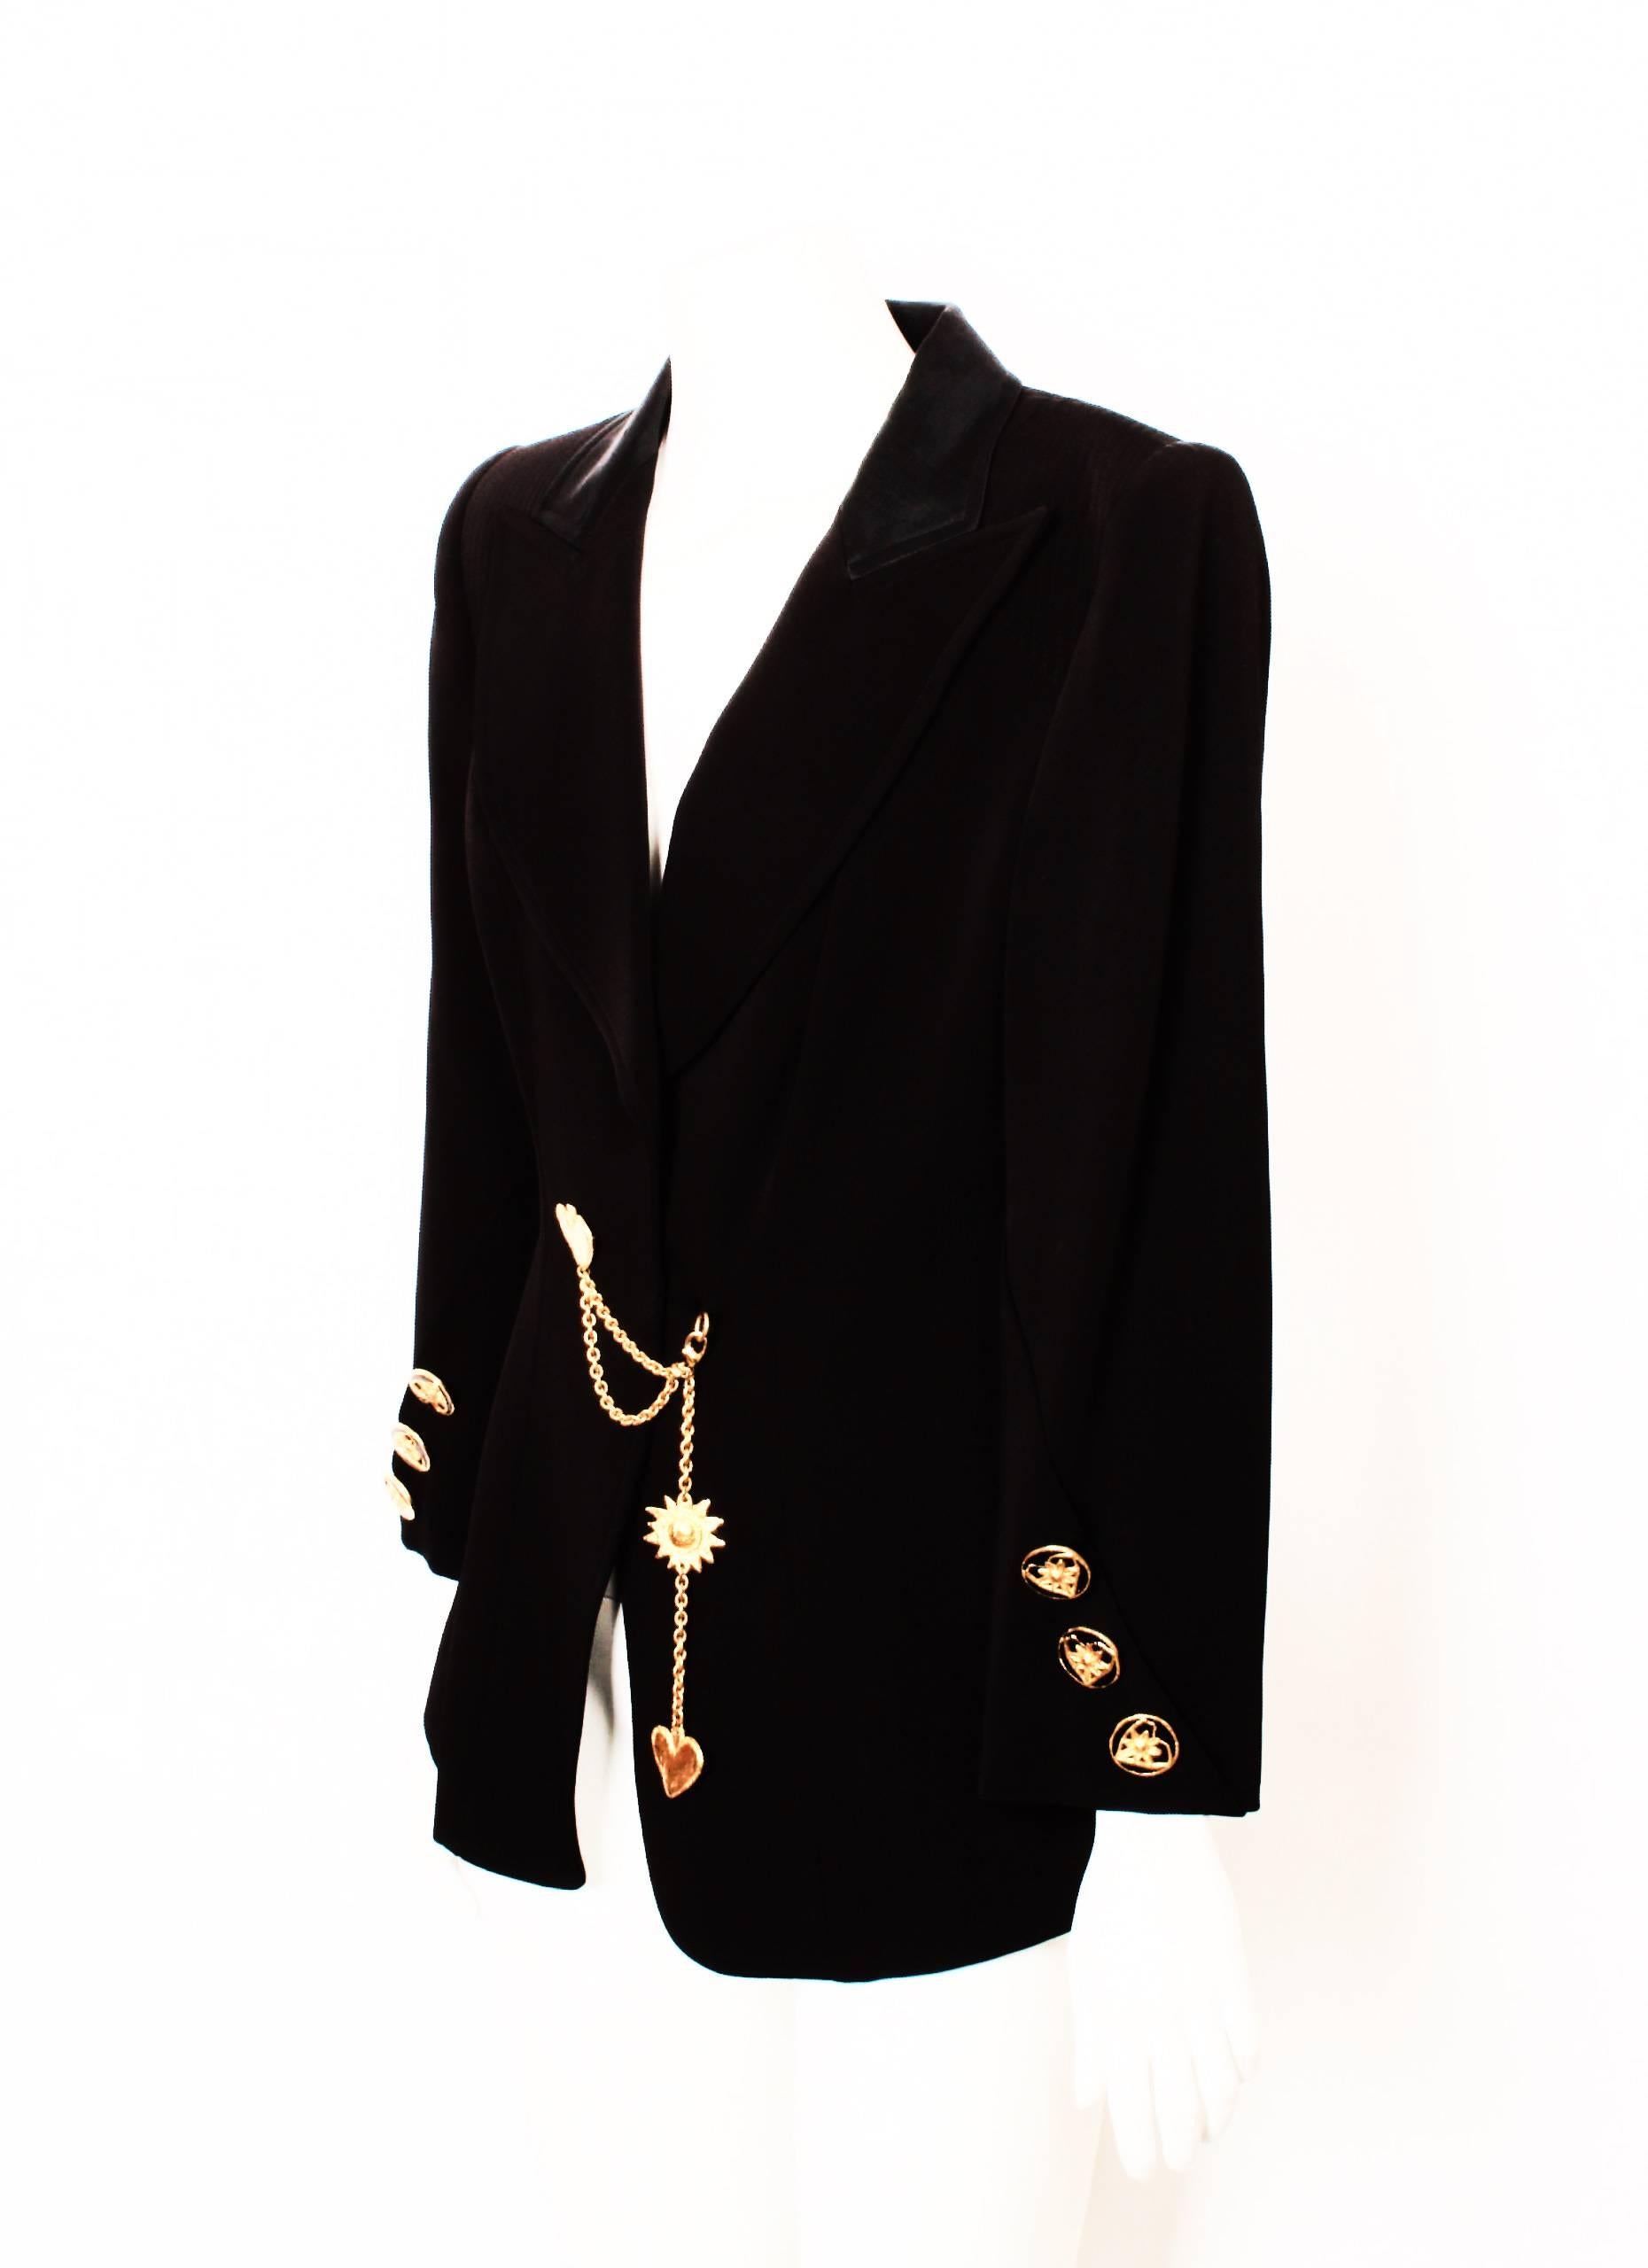 CHRISTIAN LACROIX tailored jacket in black with detachable sun and heart charm chain accessory. Features beautiful ornate gold and black heart and flower buttons, feature pockets and feature top stitching on the shoulder panels.
A magnificent